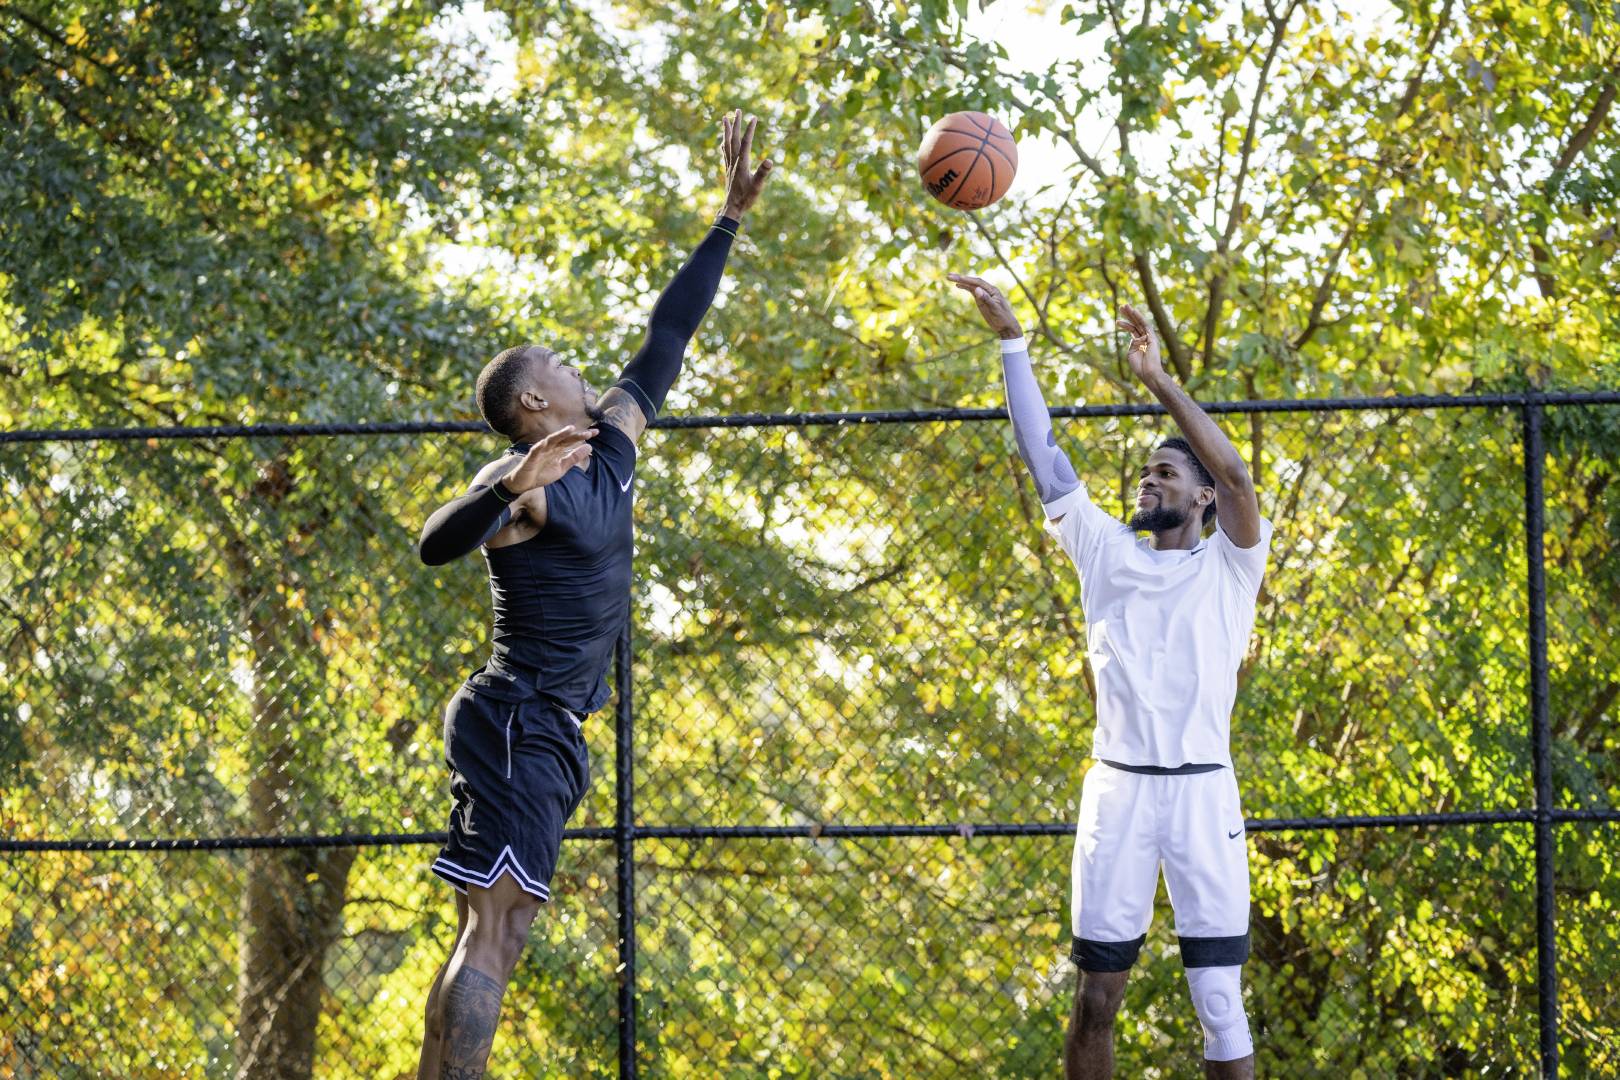 Basketball players in black game clothing tries to block his opponent in white clothes high above the ground